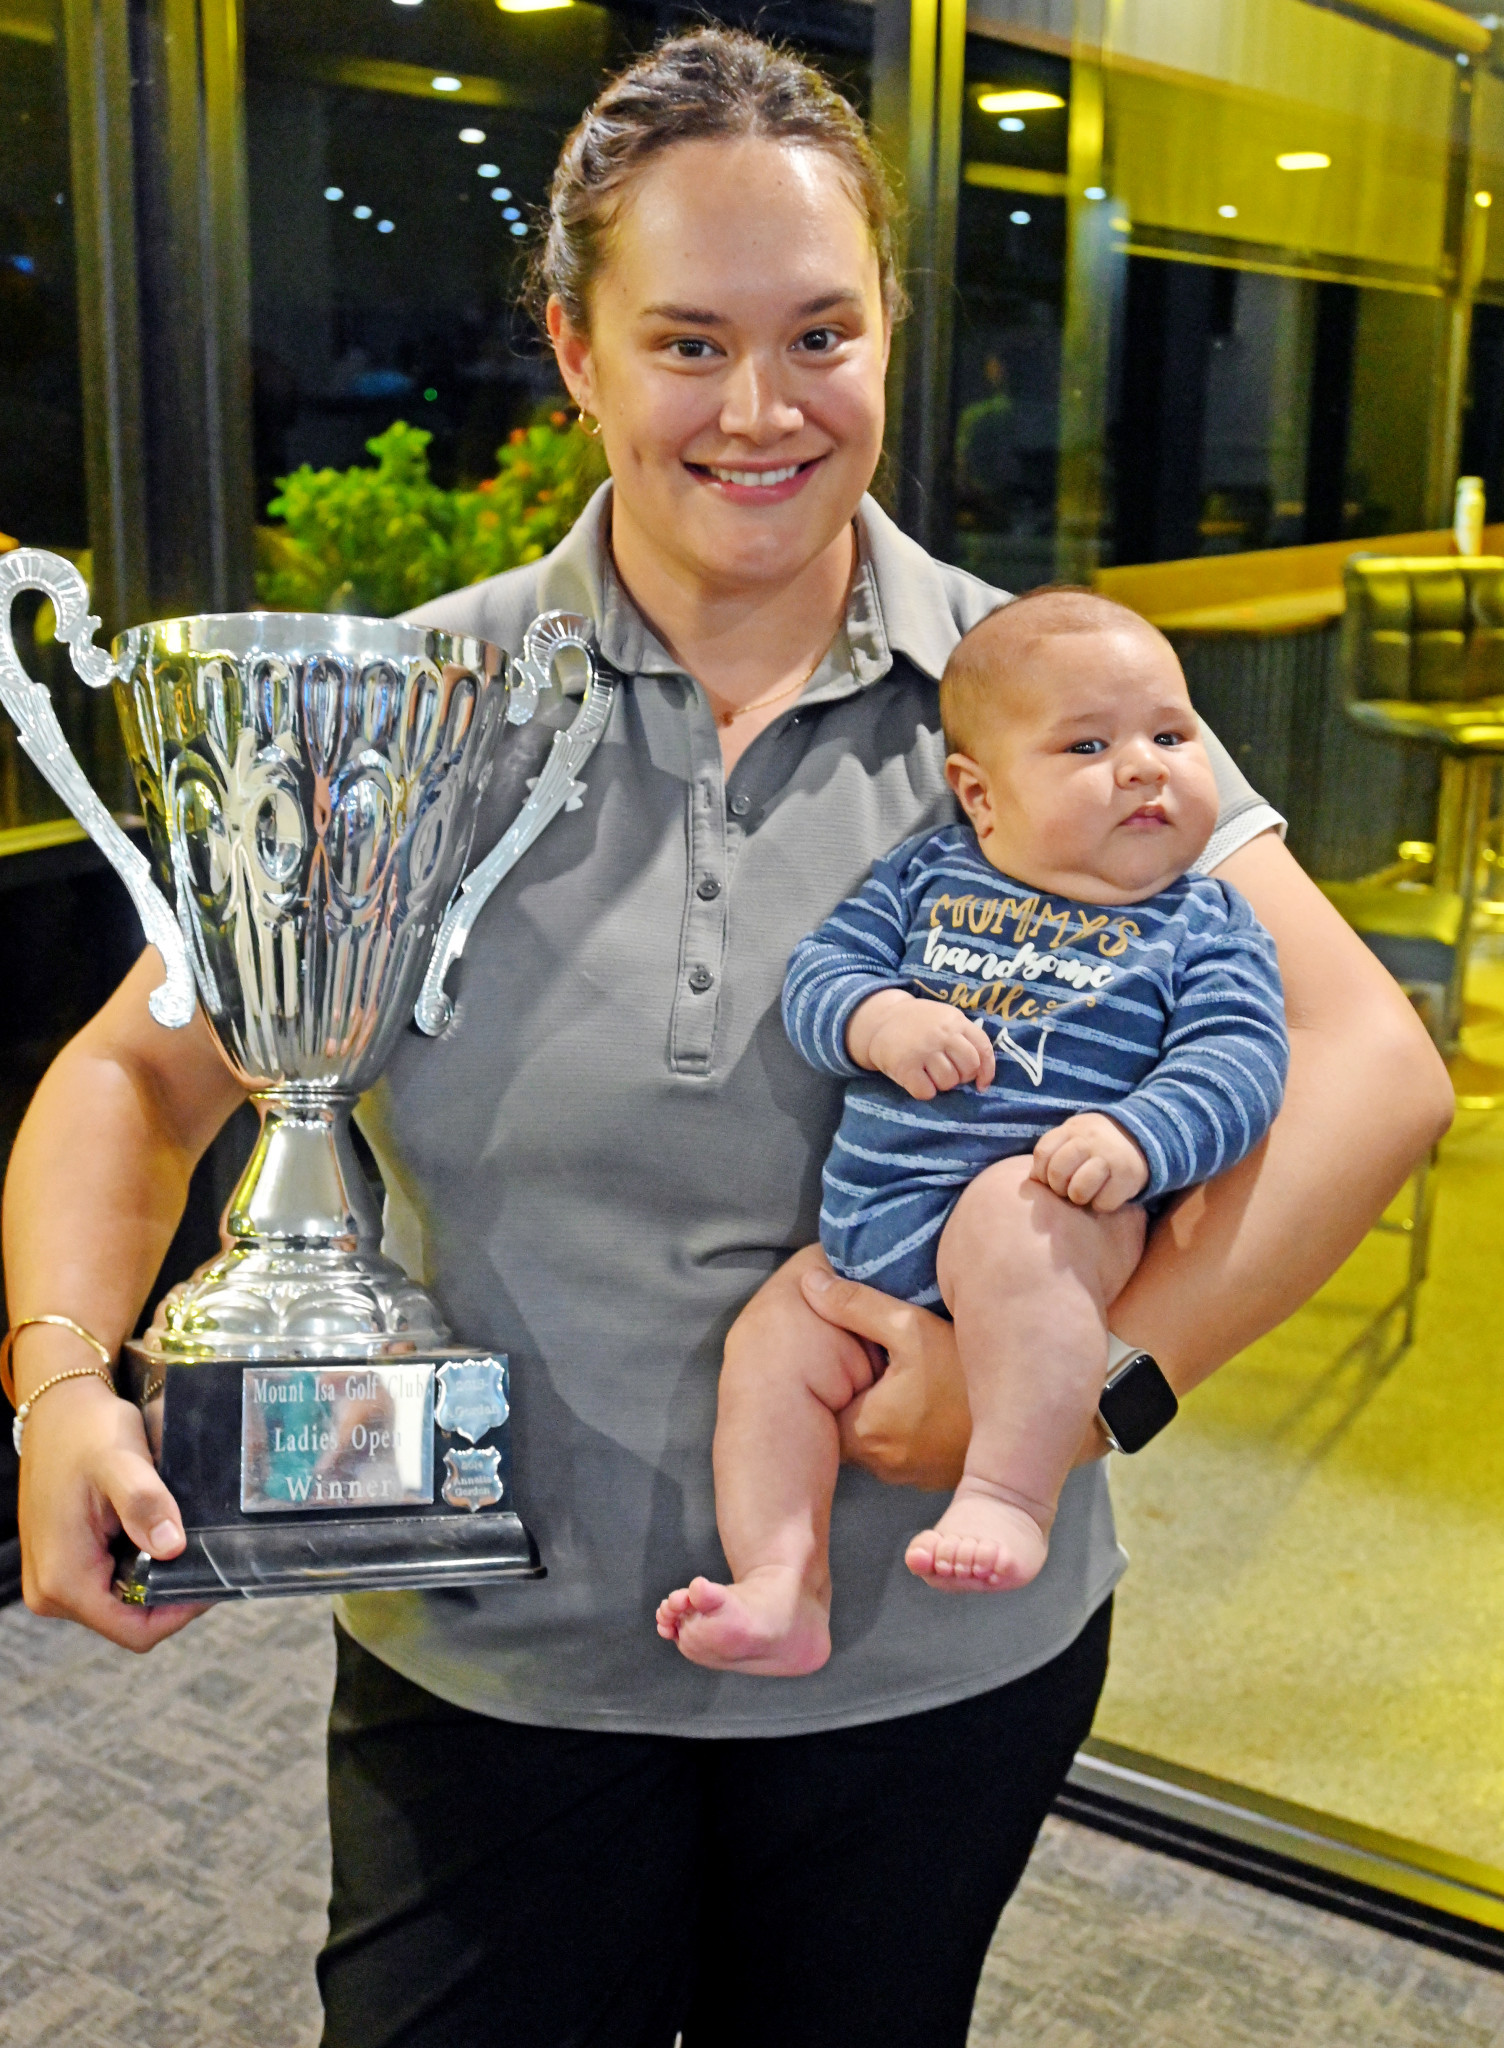 New mum and City of Mount Isa Open women’s champion Kate Chadwick with two prized possessions, her son Eli and the winning trophy.